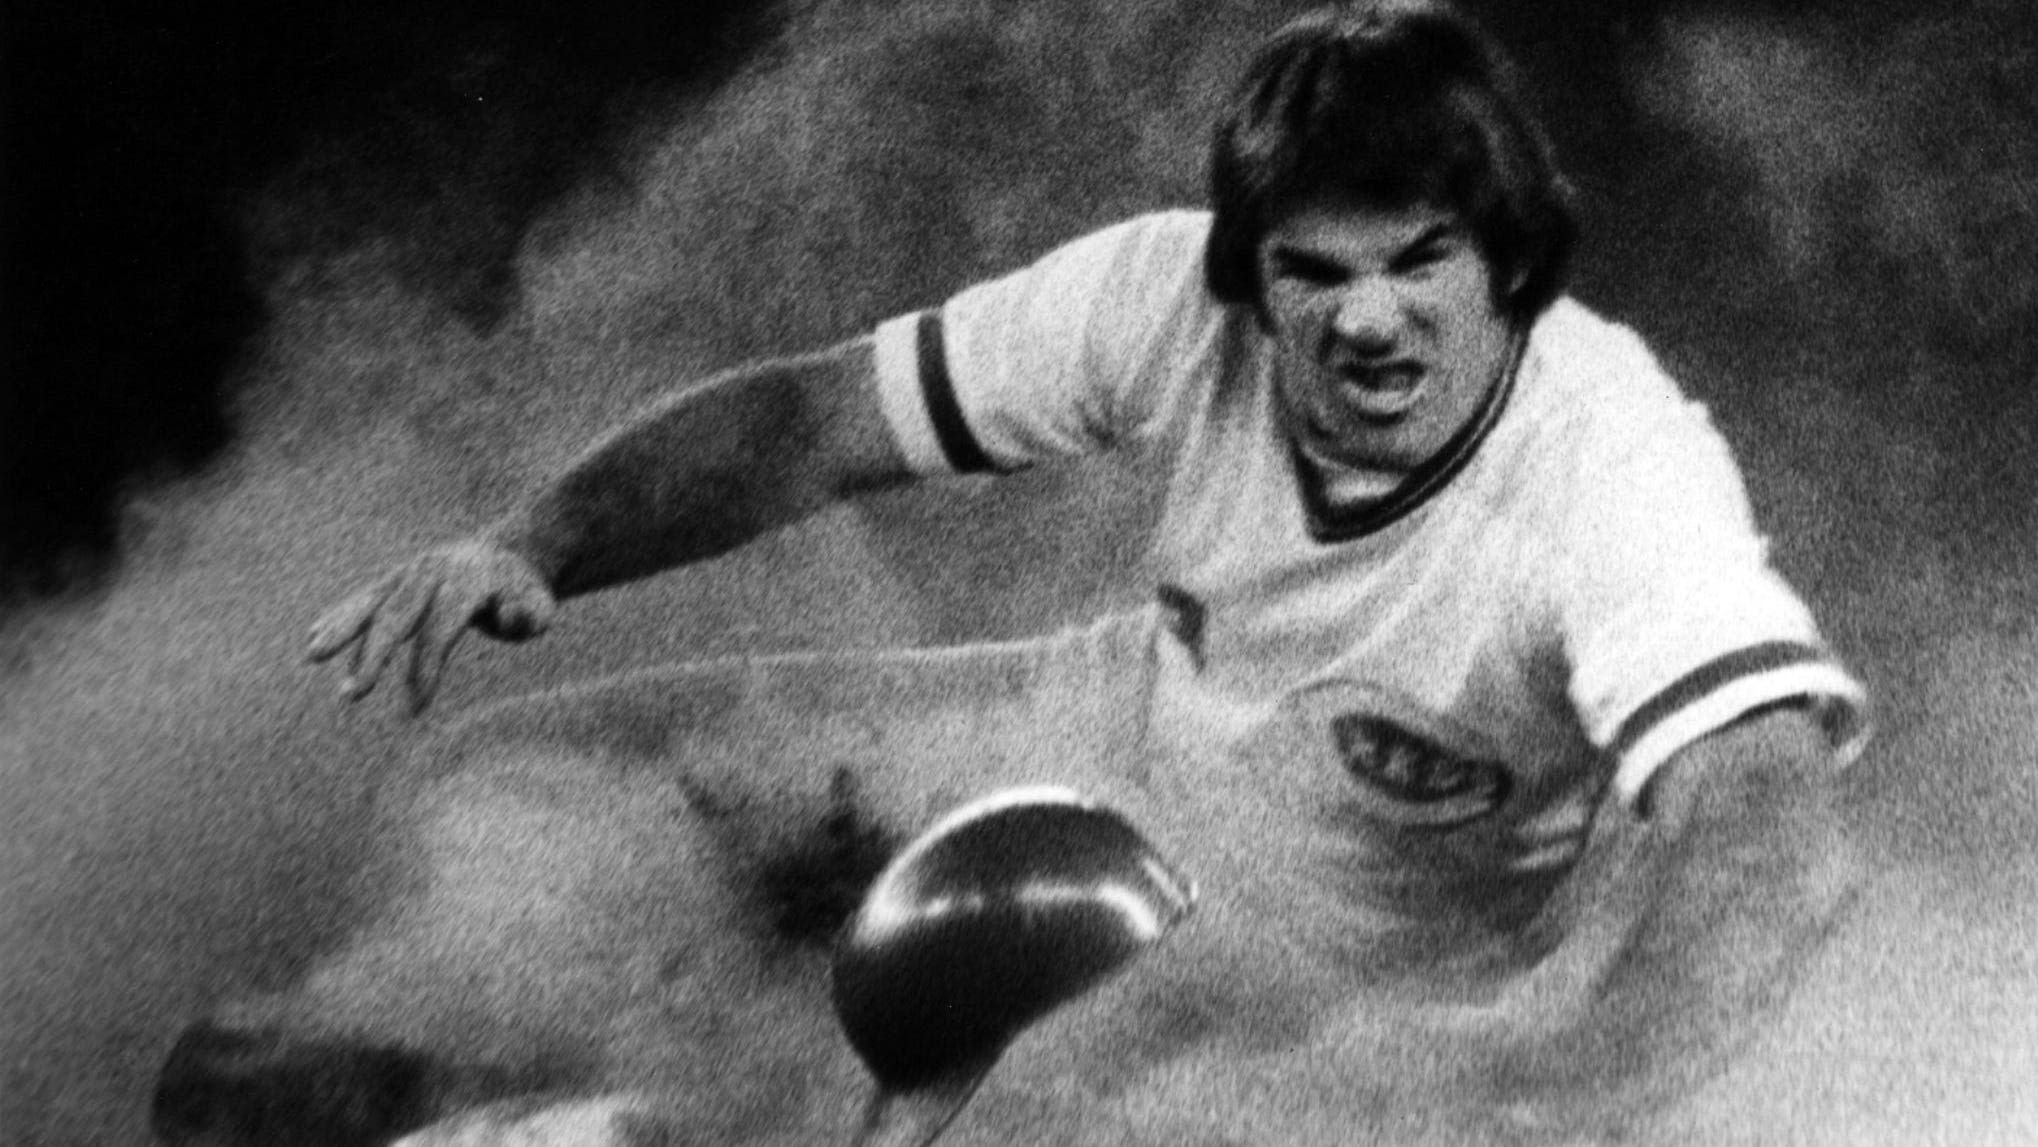 'His teams sure beat the spread a lot.' The time I talked Vince Dooley with Pete Rose | Smith